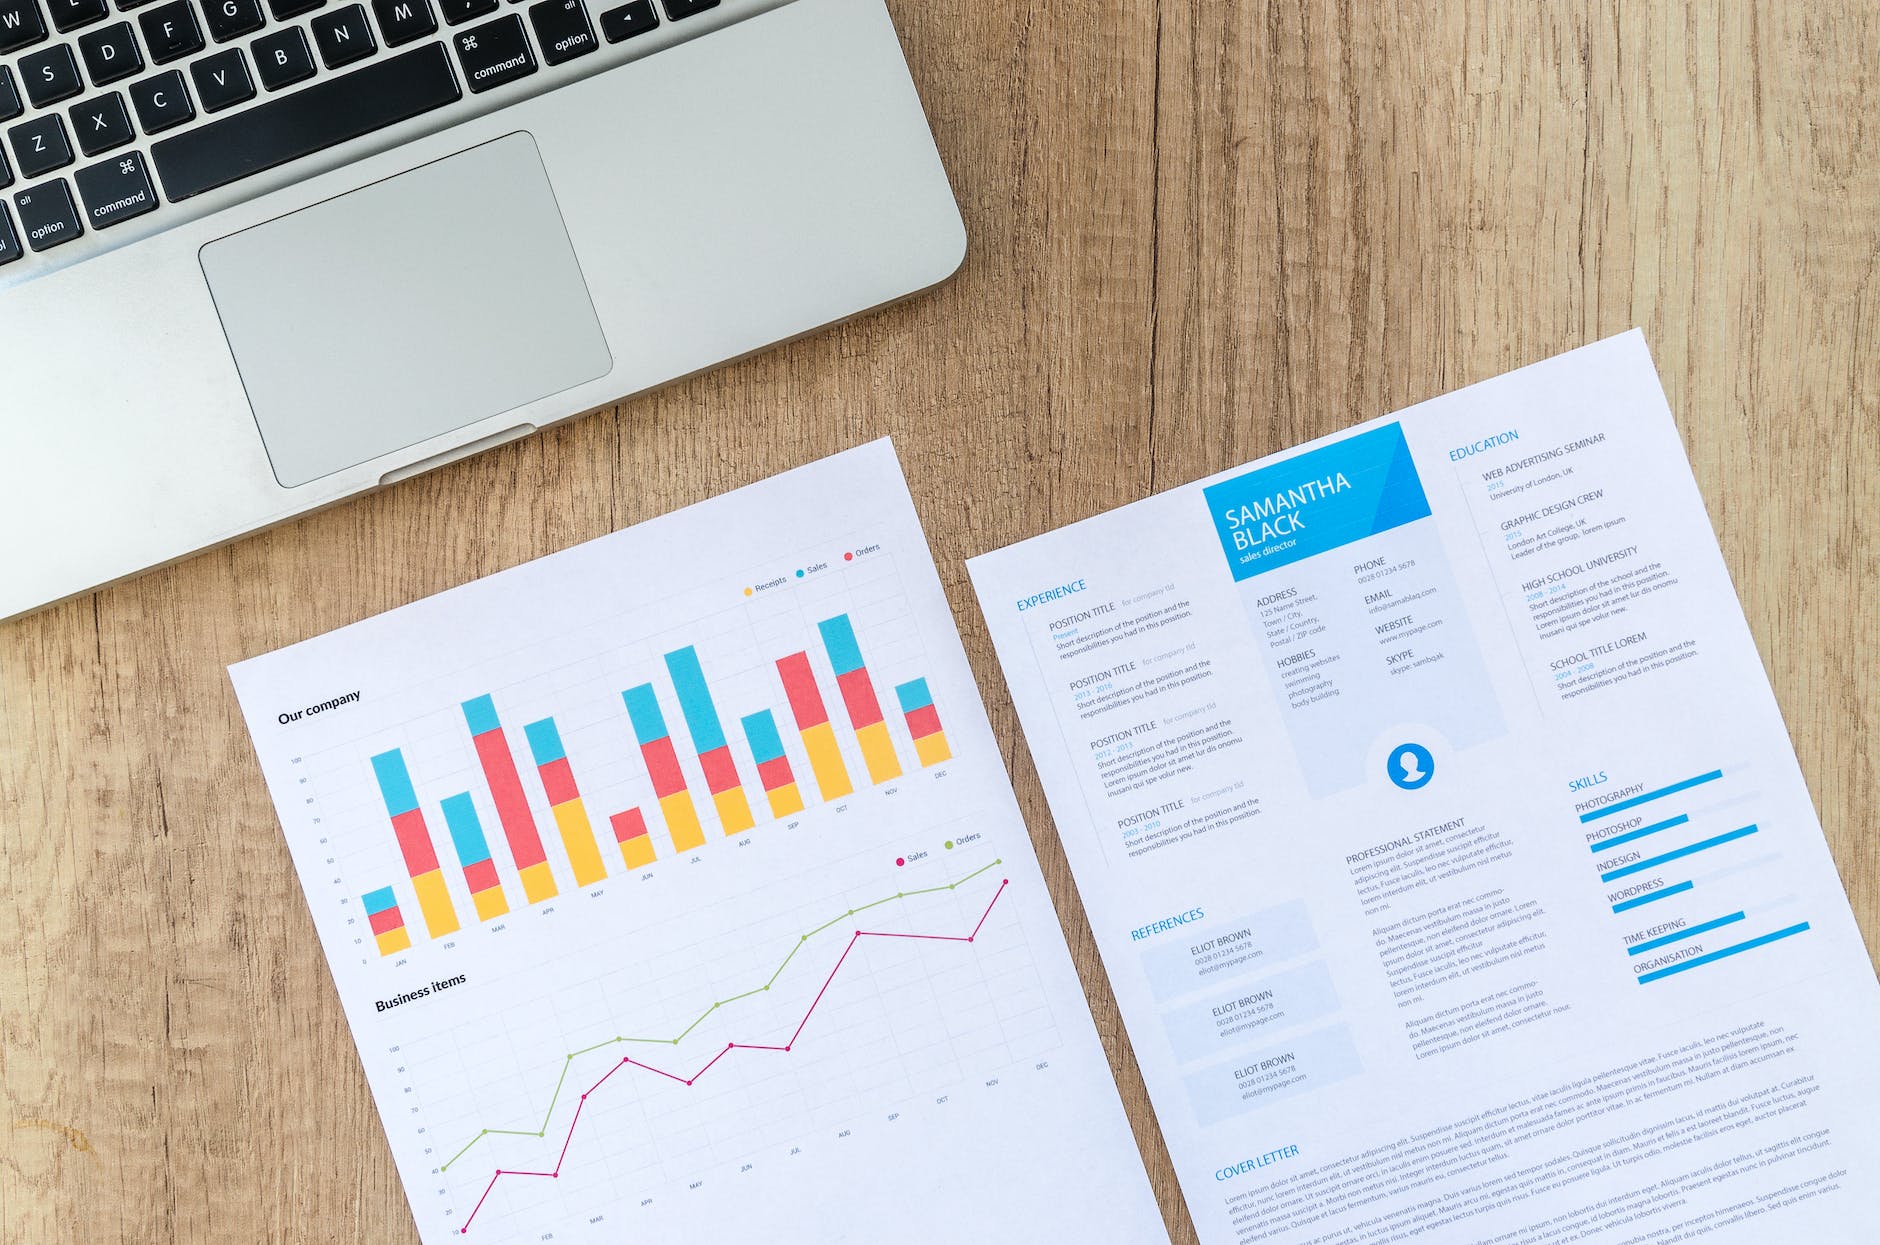 Measuring ABM Success: Essential KPIs to Track Your Reach and Expansion